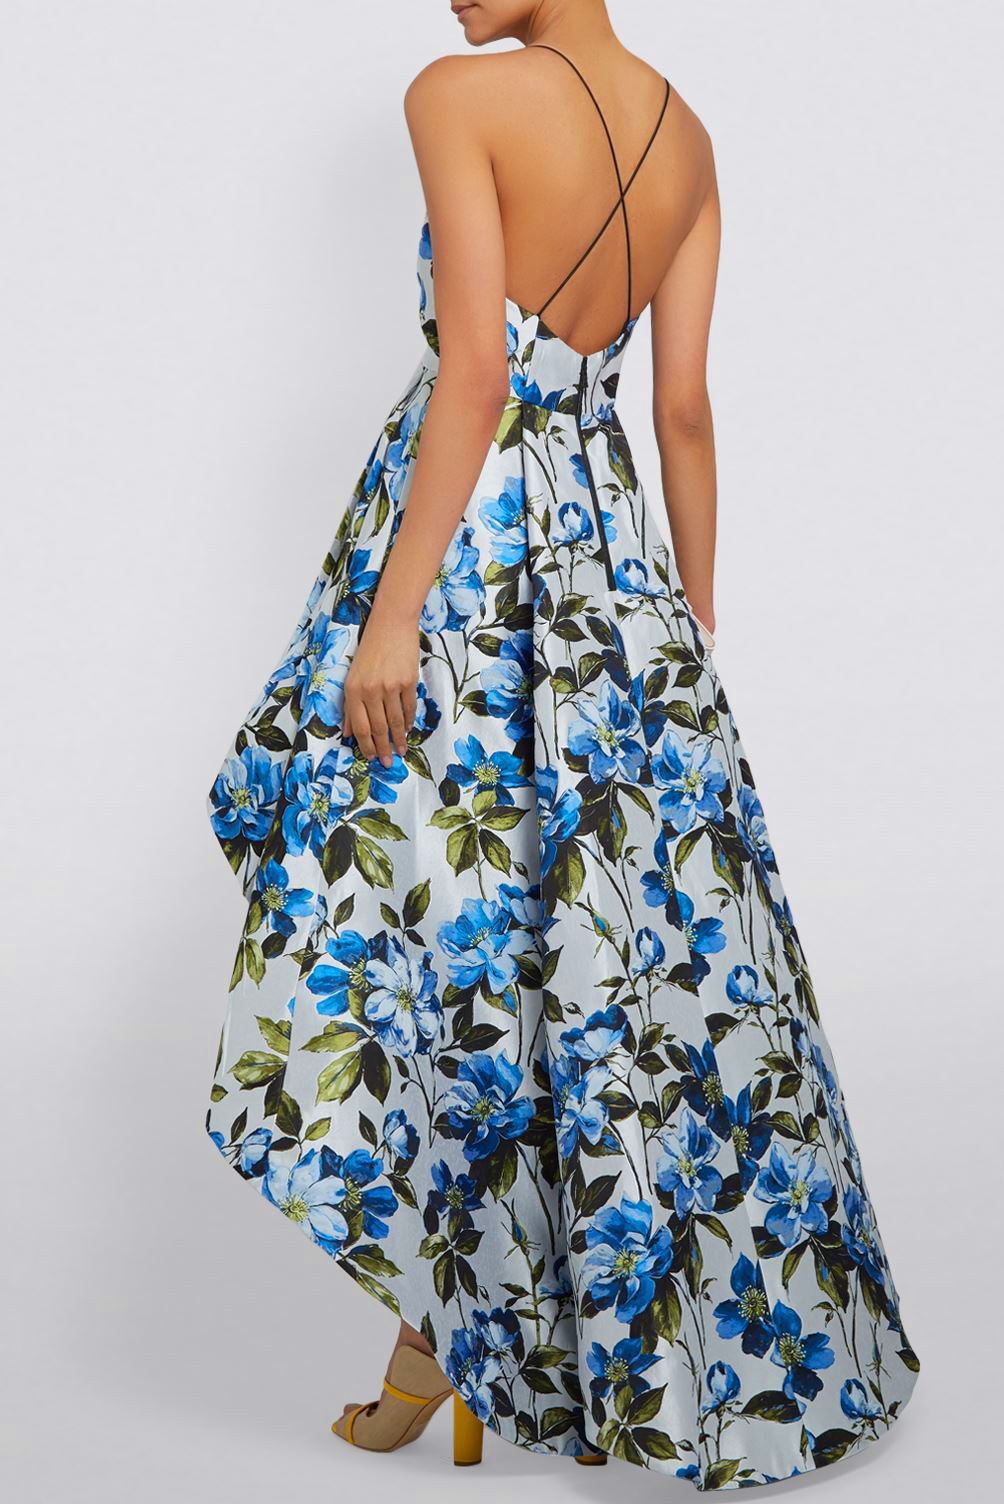 MUST HAVE: Alice + Olivia Joss High-Low Gown